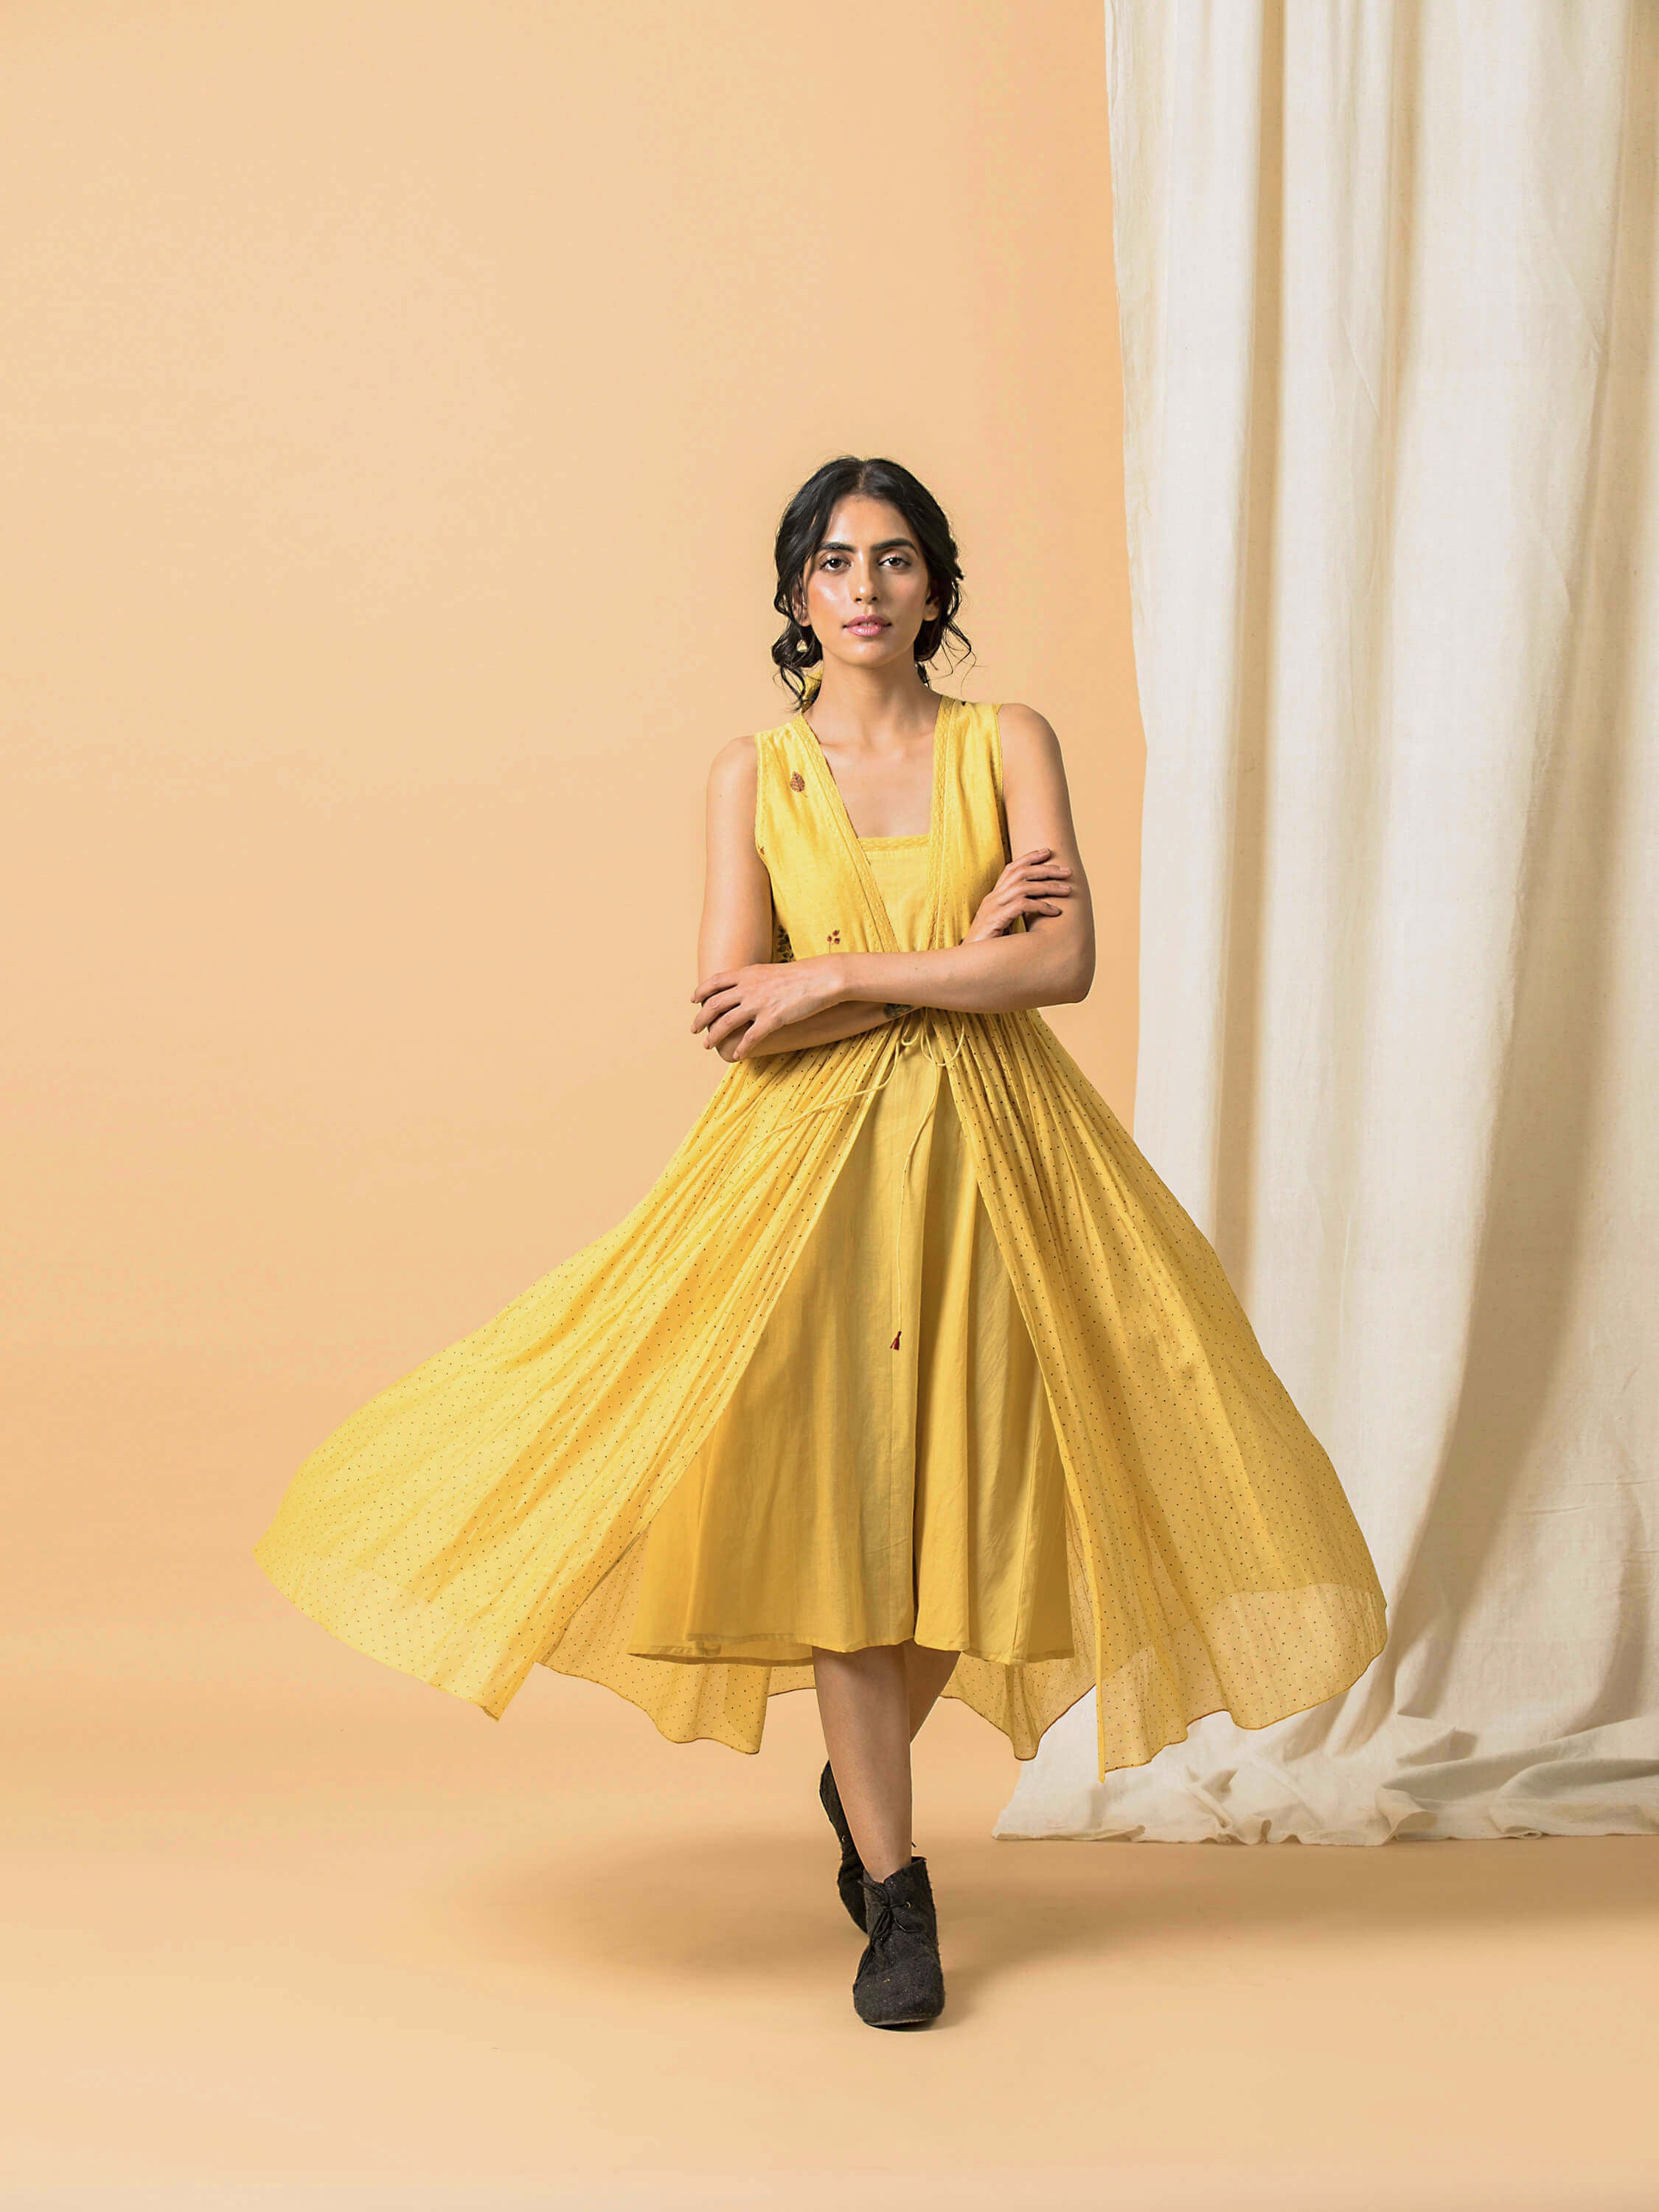 Woman in a flowing yellow dress posing against a beige background.